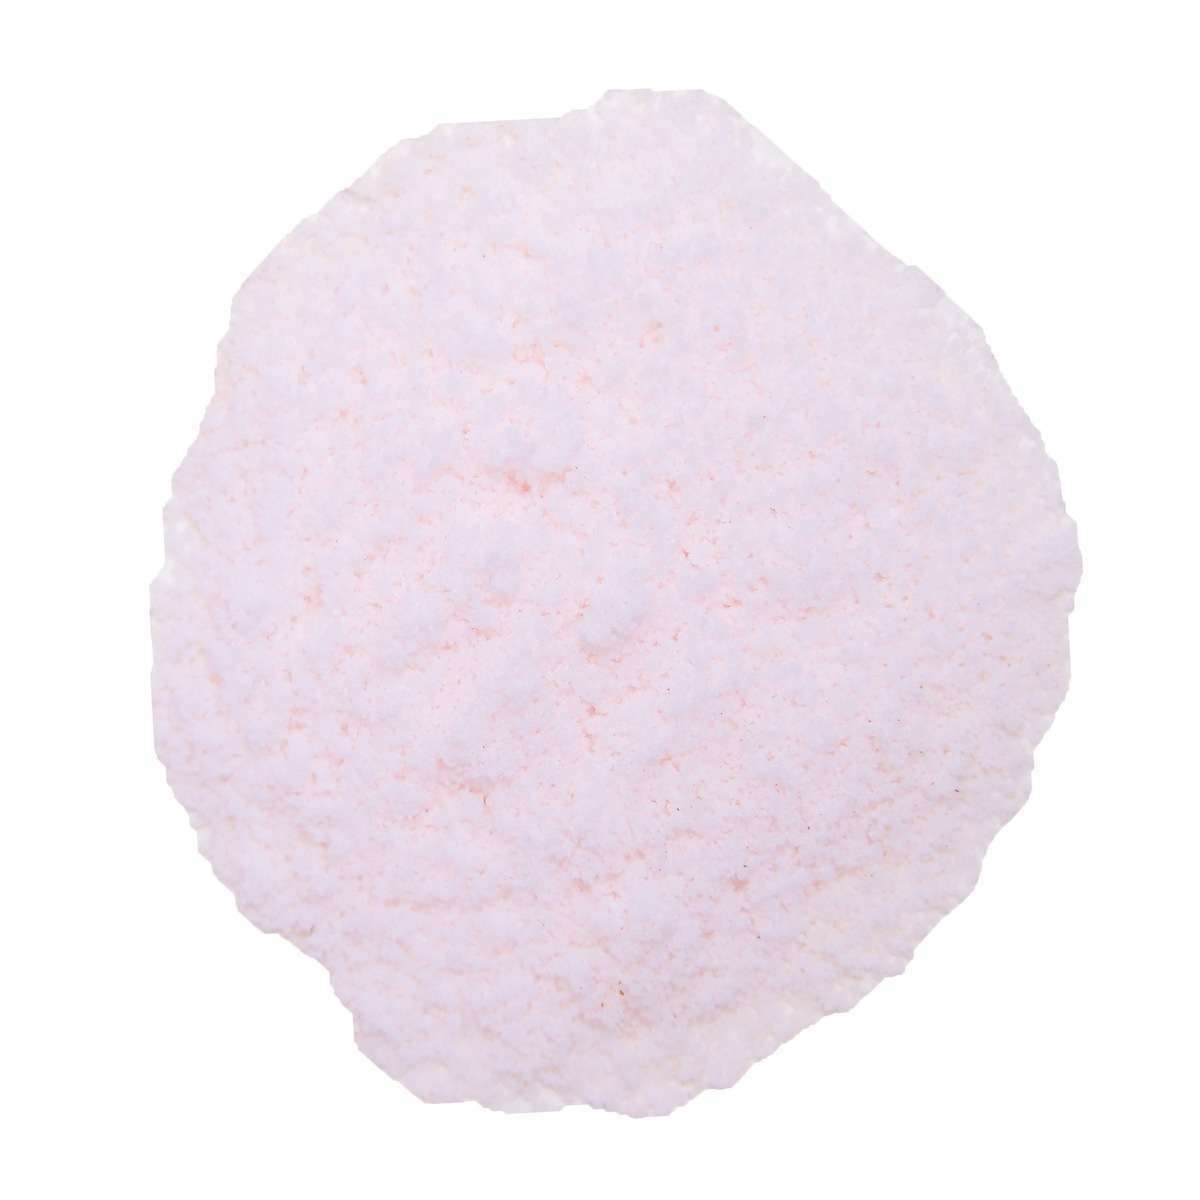 products curing salt  74316.1570583517.1280.1280